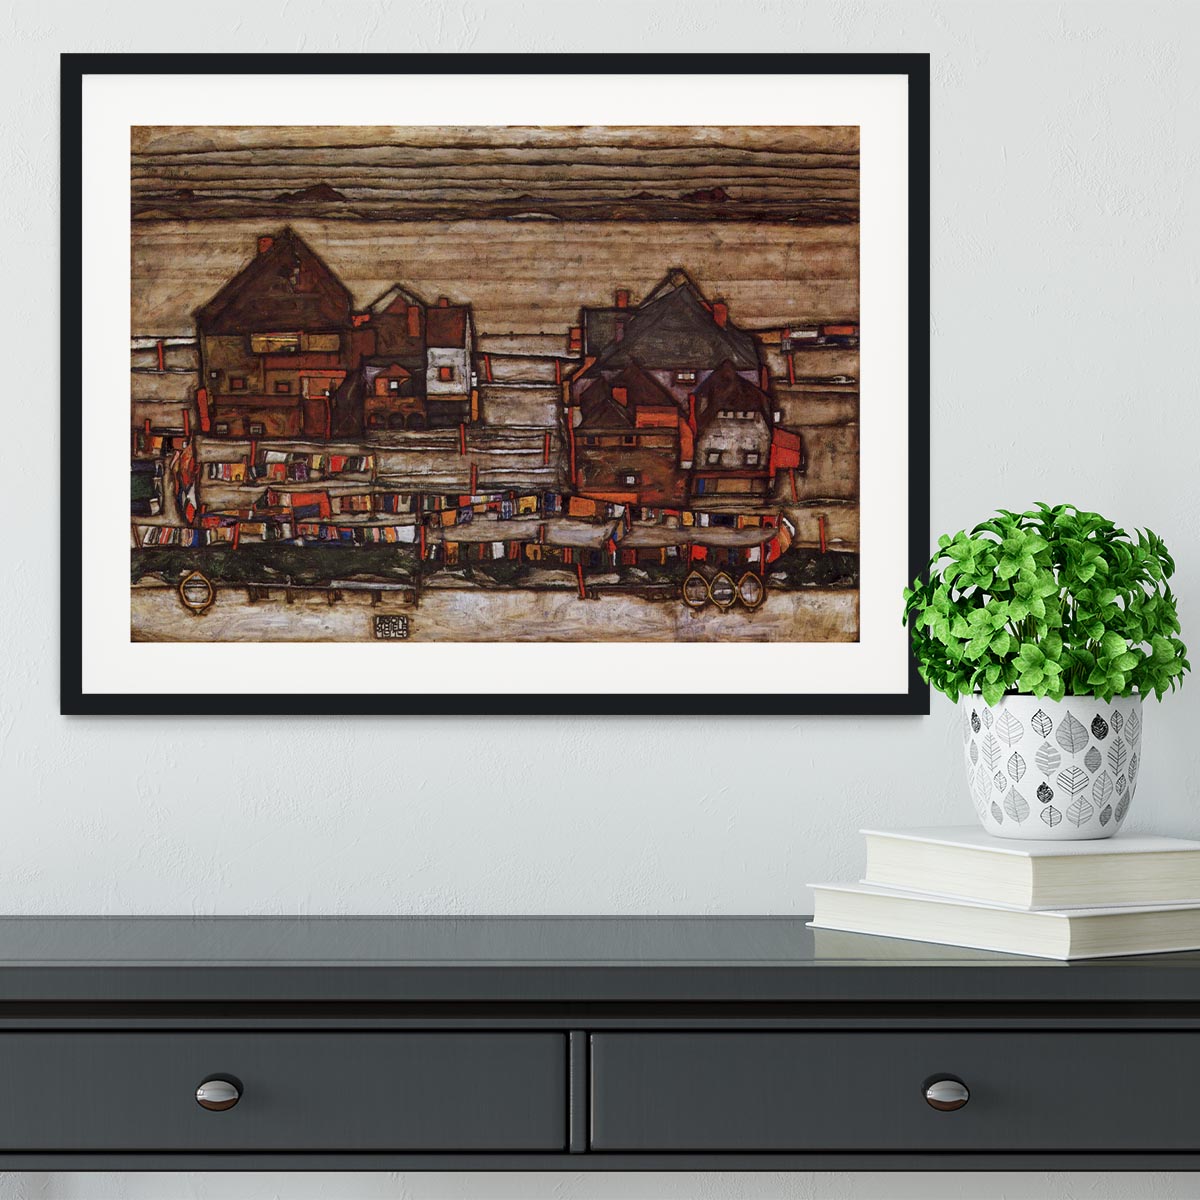 Houses with laundry lines and suburban by Egon Schiele Framed Print - Canvas Art Rocks - 1